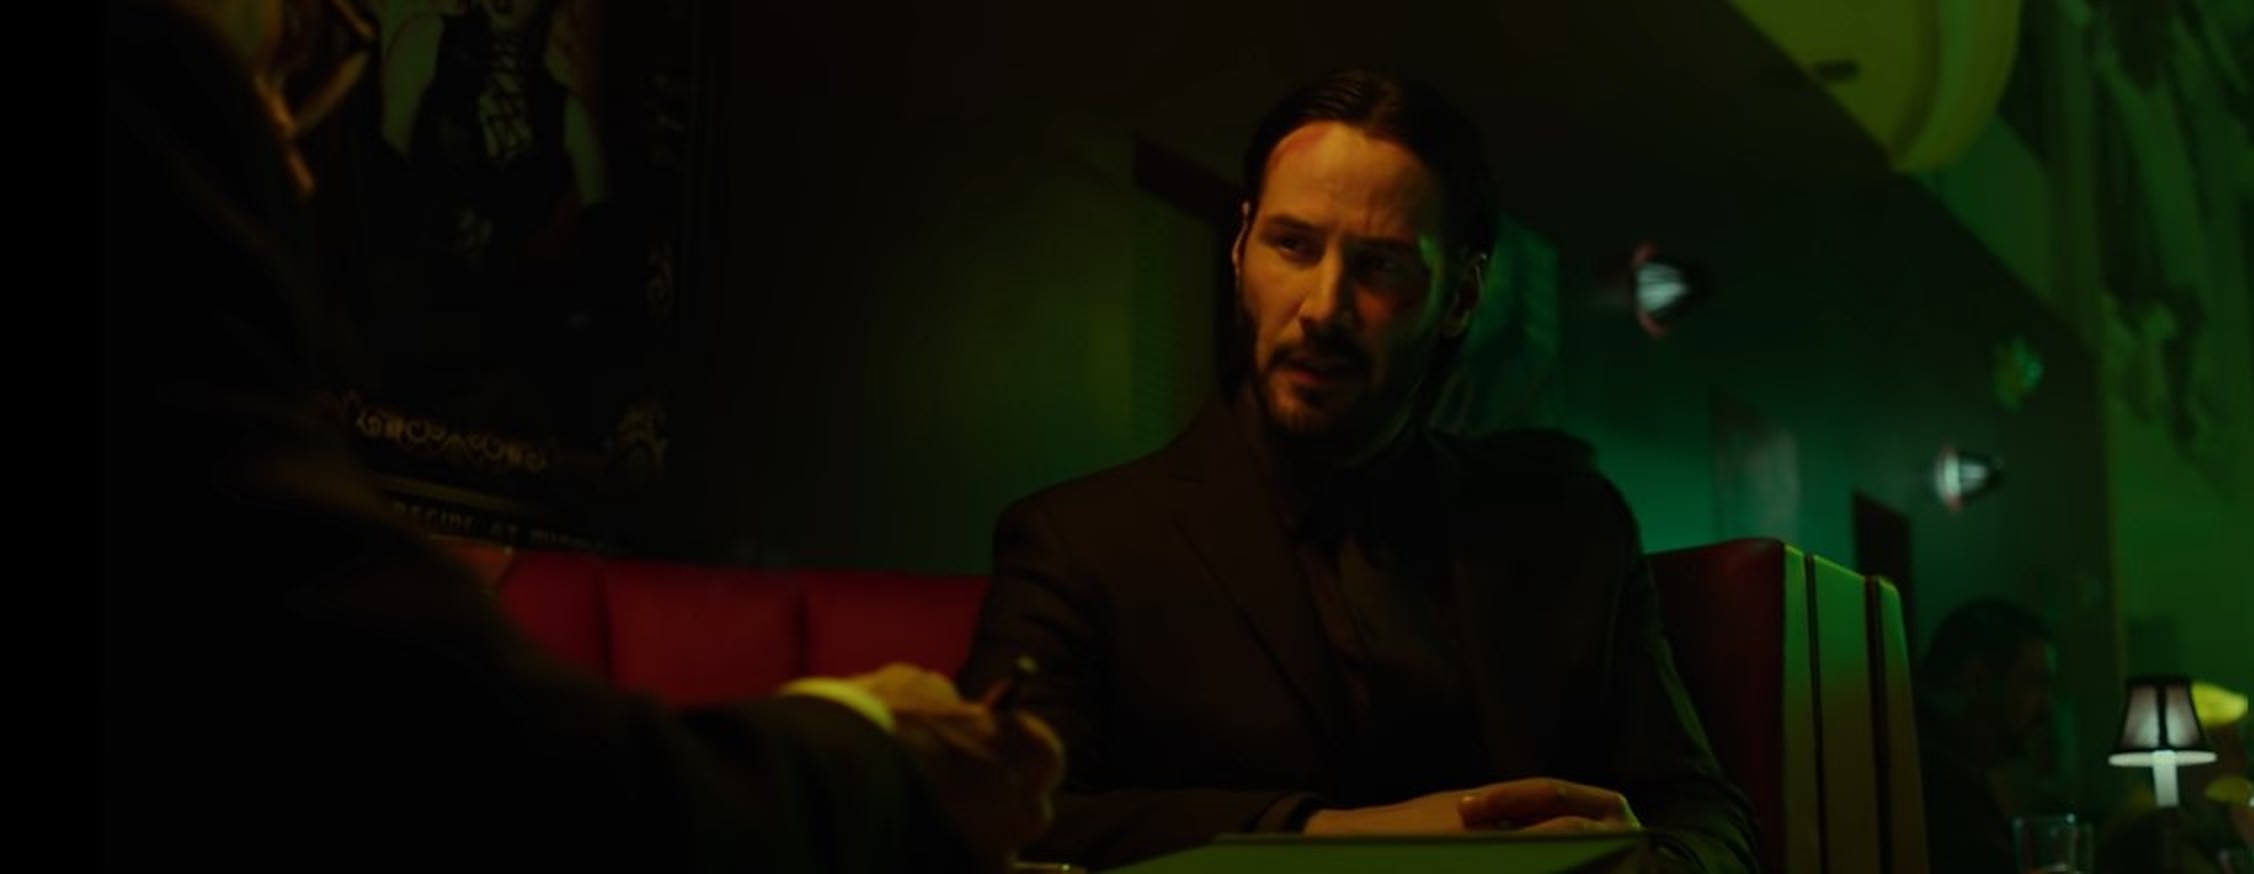 Where Was John Wick Filmed? 2014 Movie Filming Locations